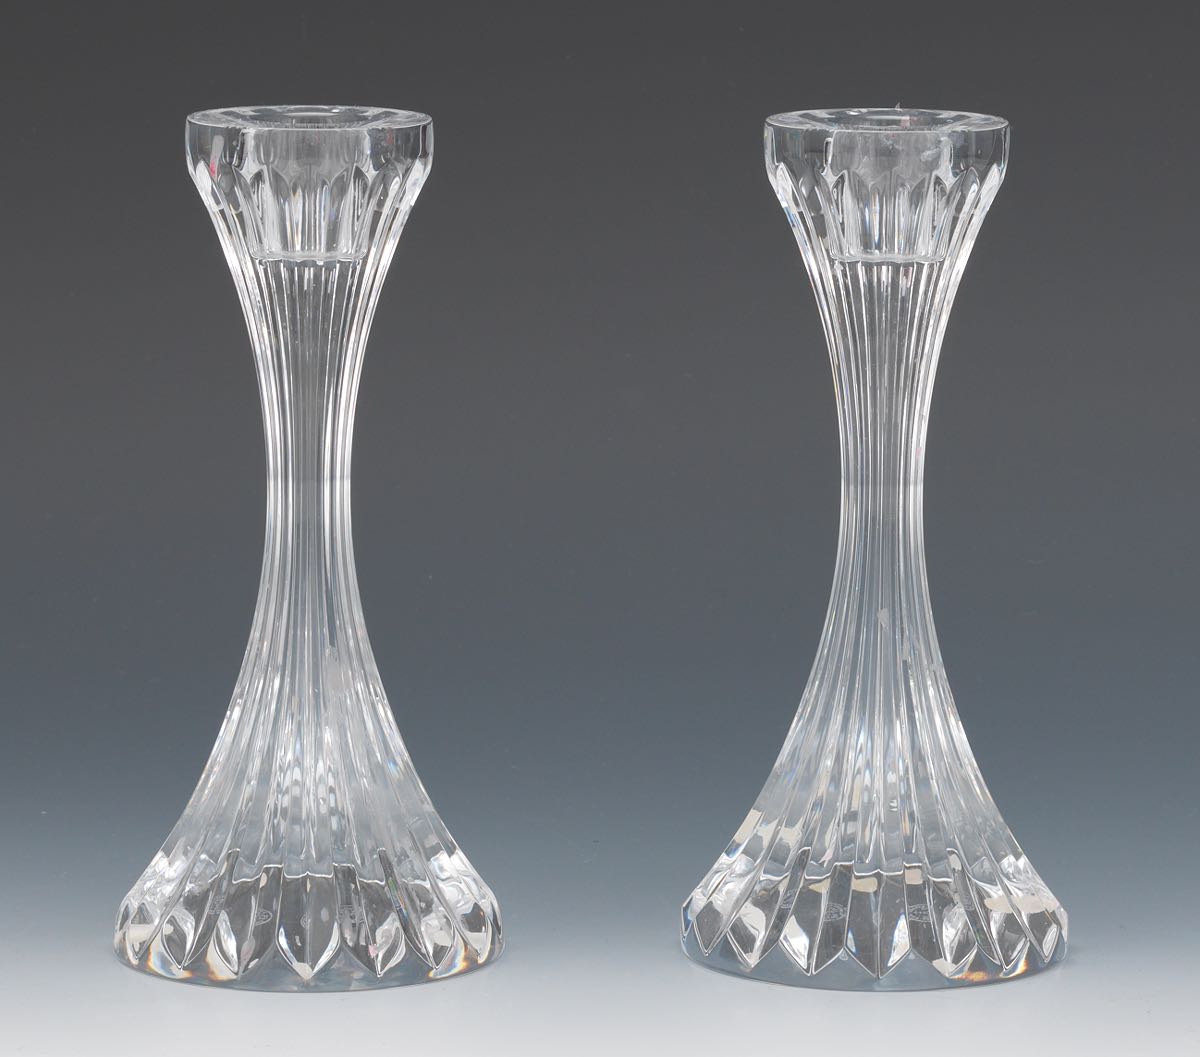 A Pair of Baccarat Candlesticks 6-1/8"Modern tapering shape with furrowed sides, Baccarat logo